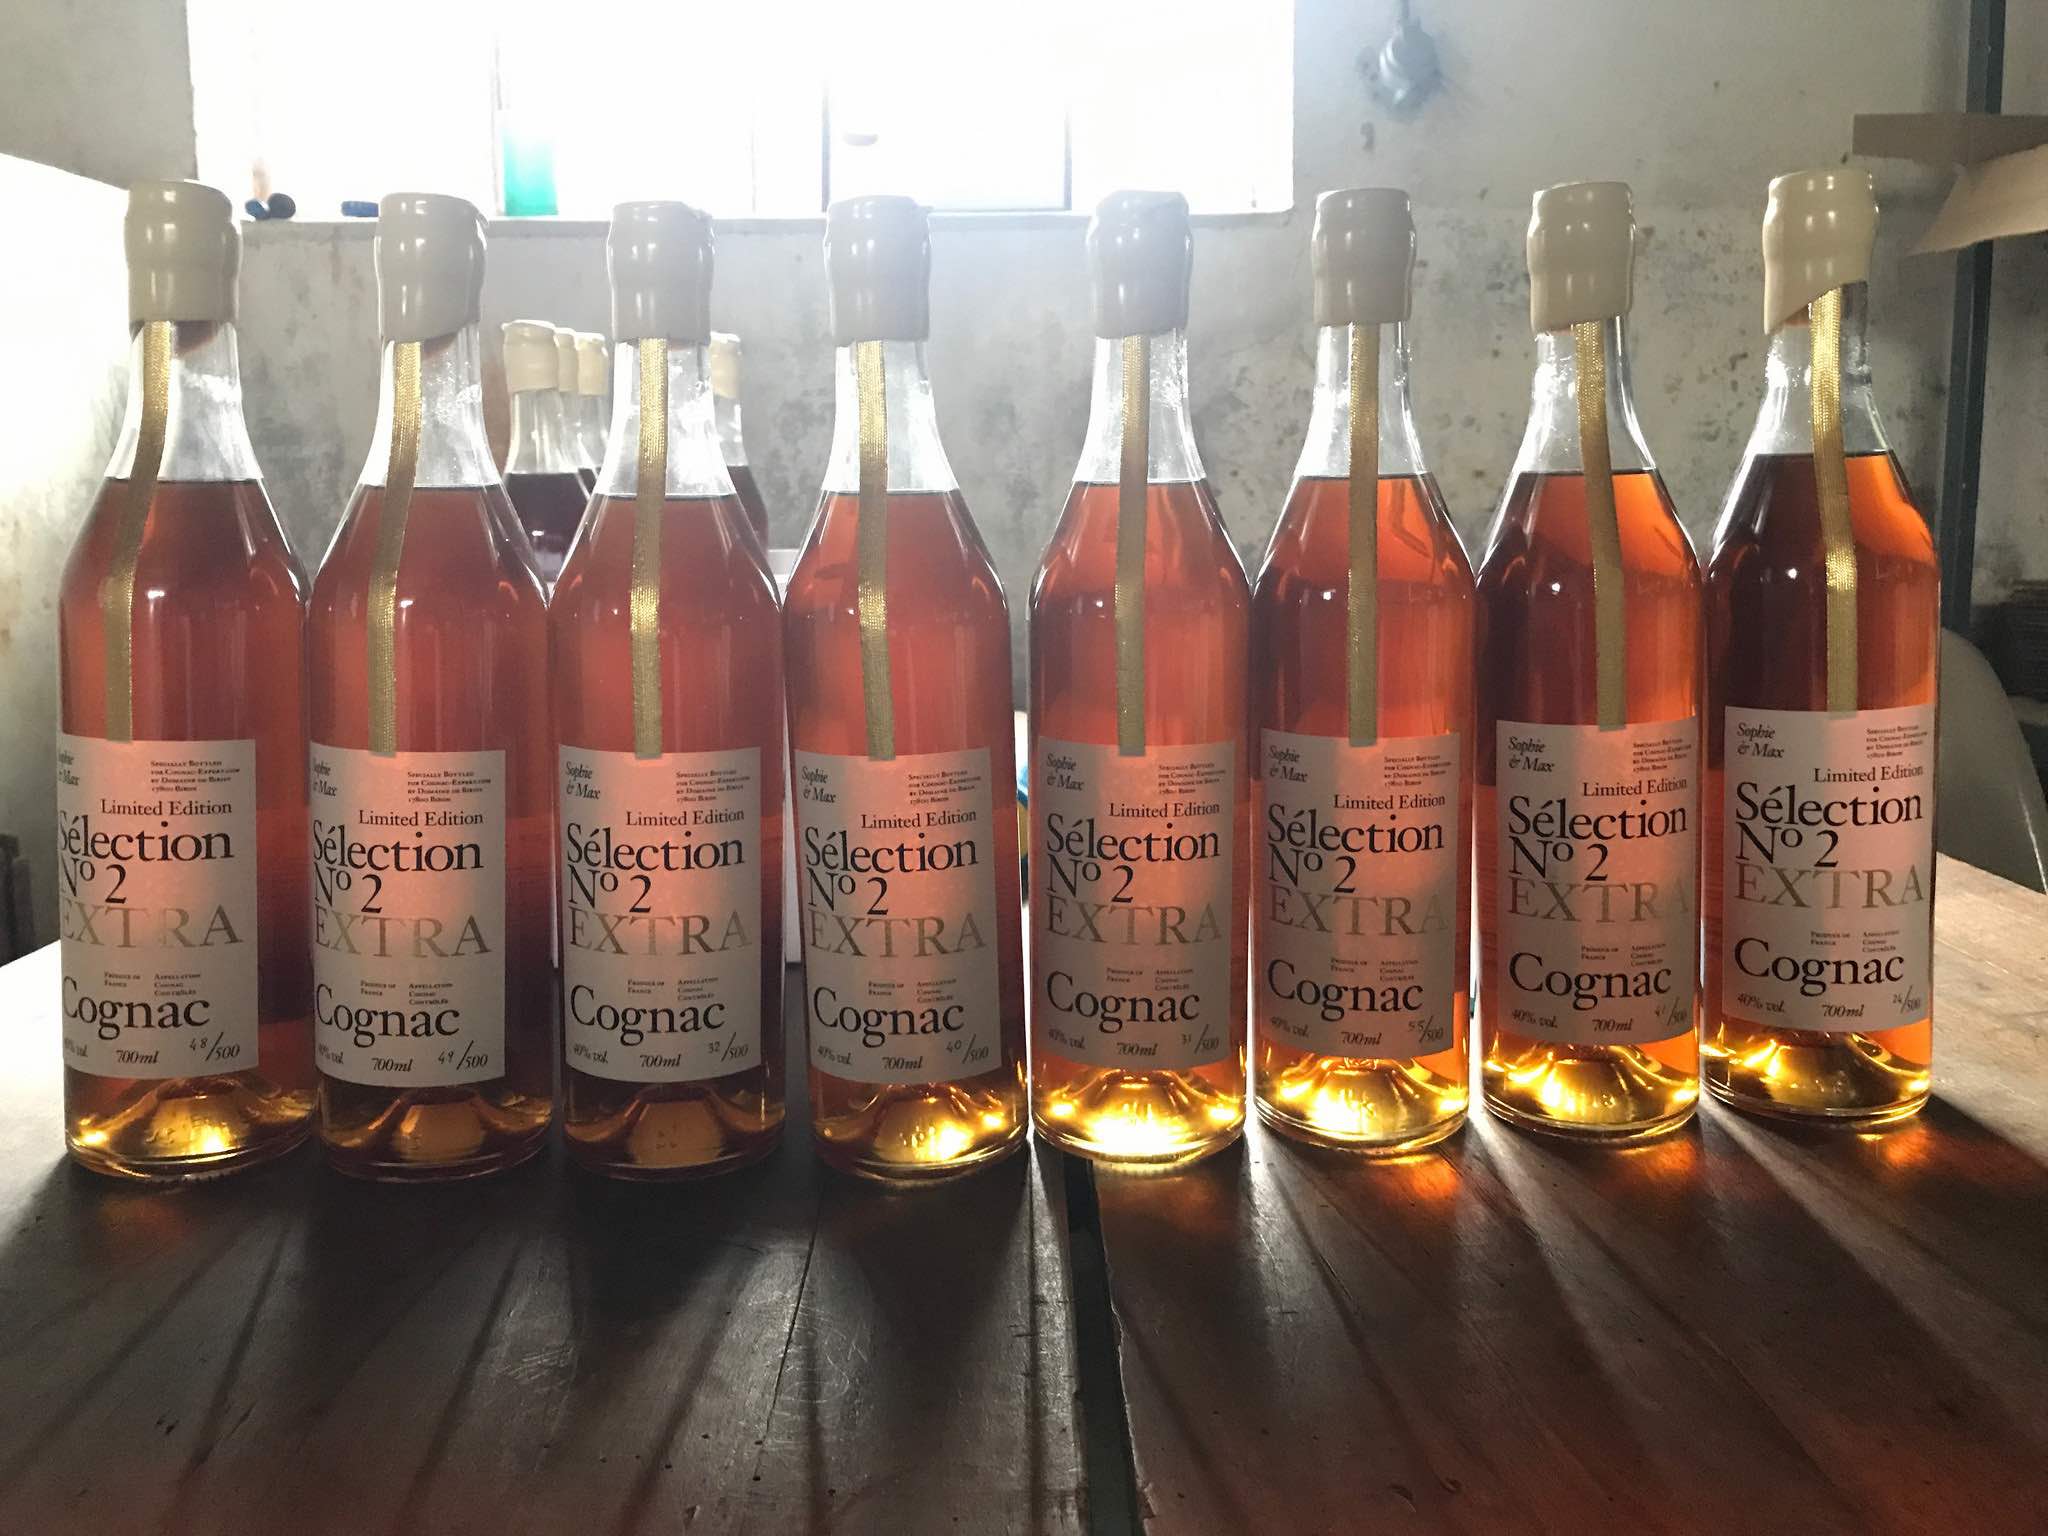 The Making Of: Sophie & Max Sélection N° 2 Limited Edition Cognac